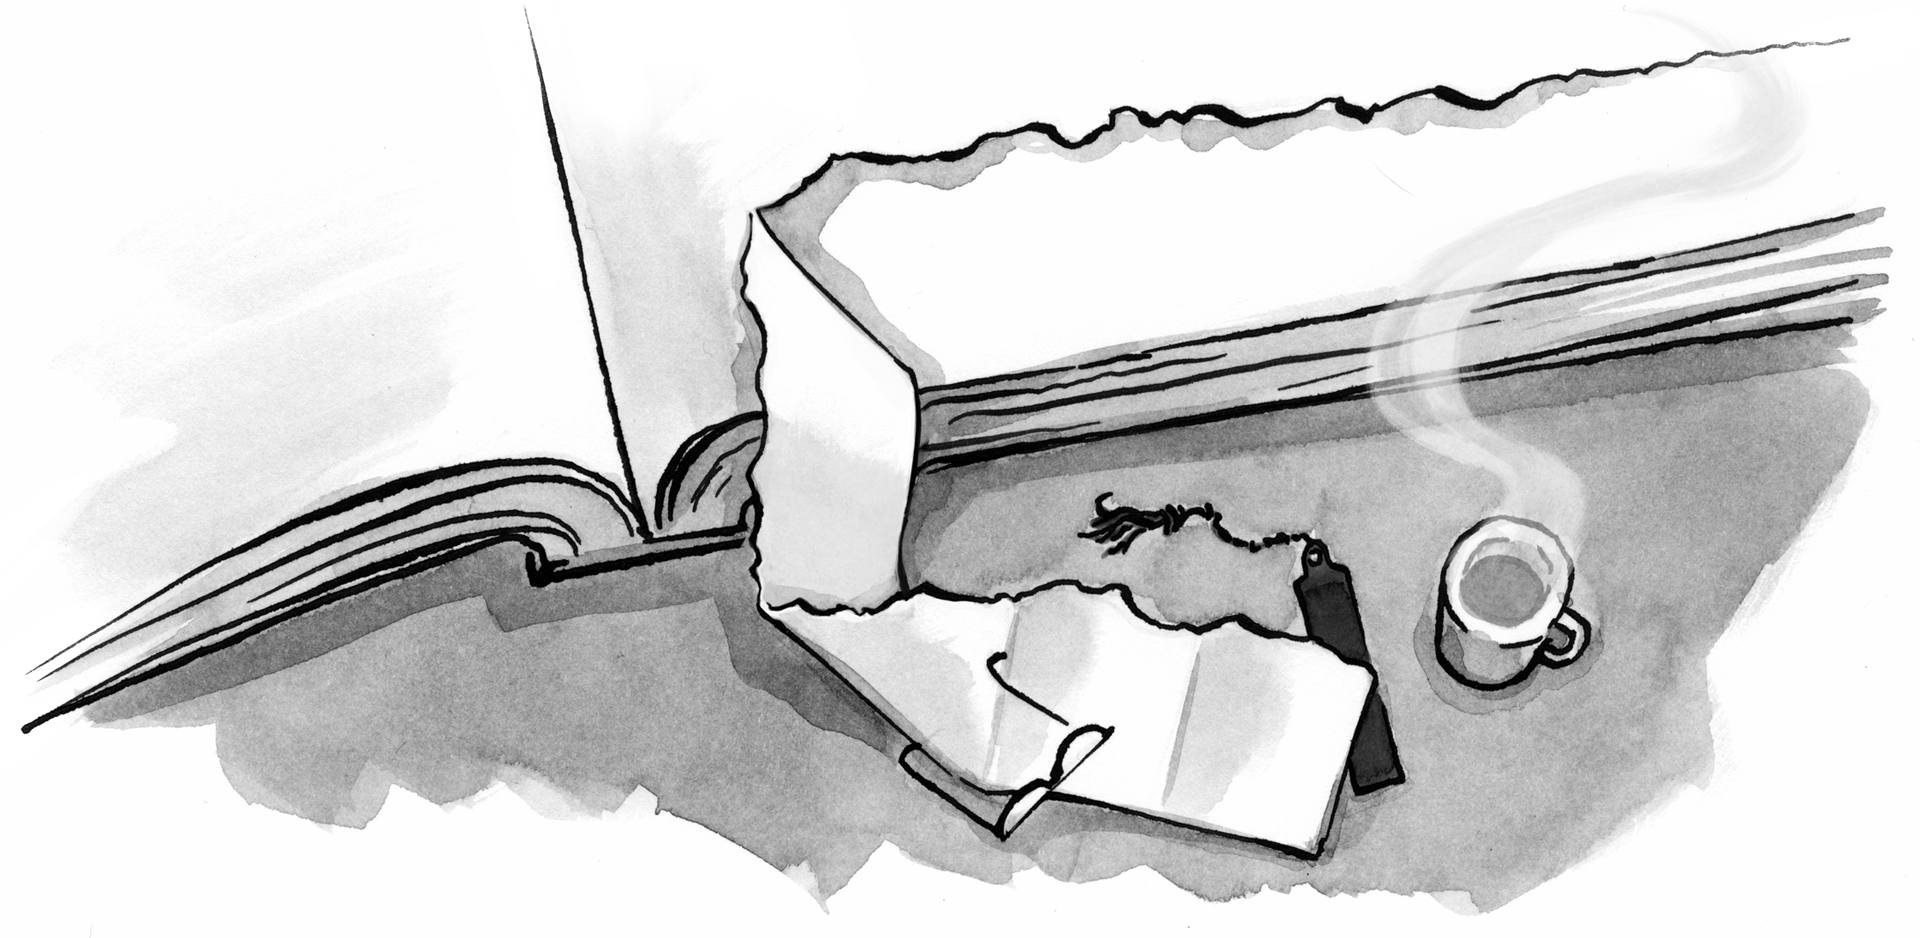 Illustration: A large piece of paper torn from a book